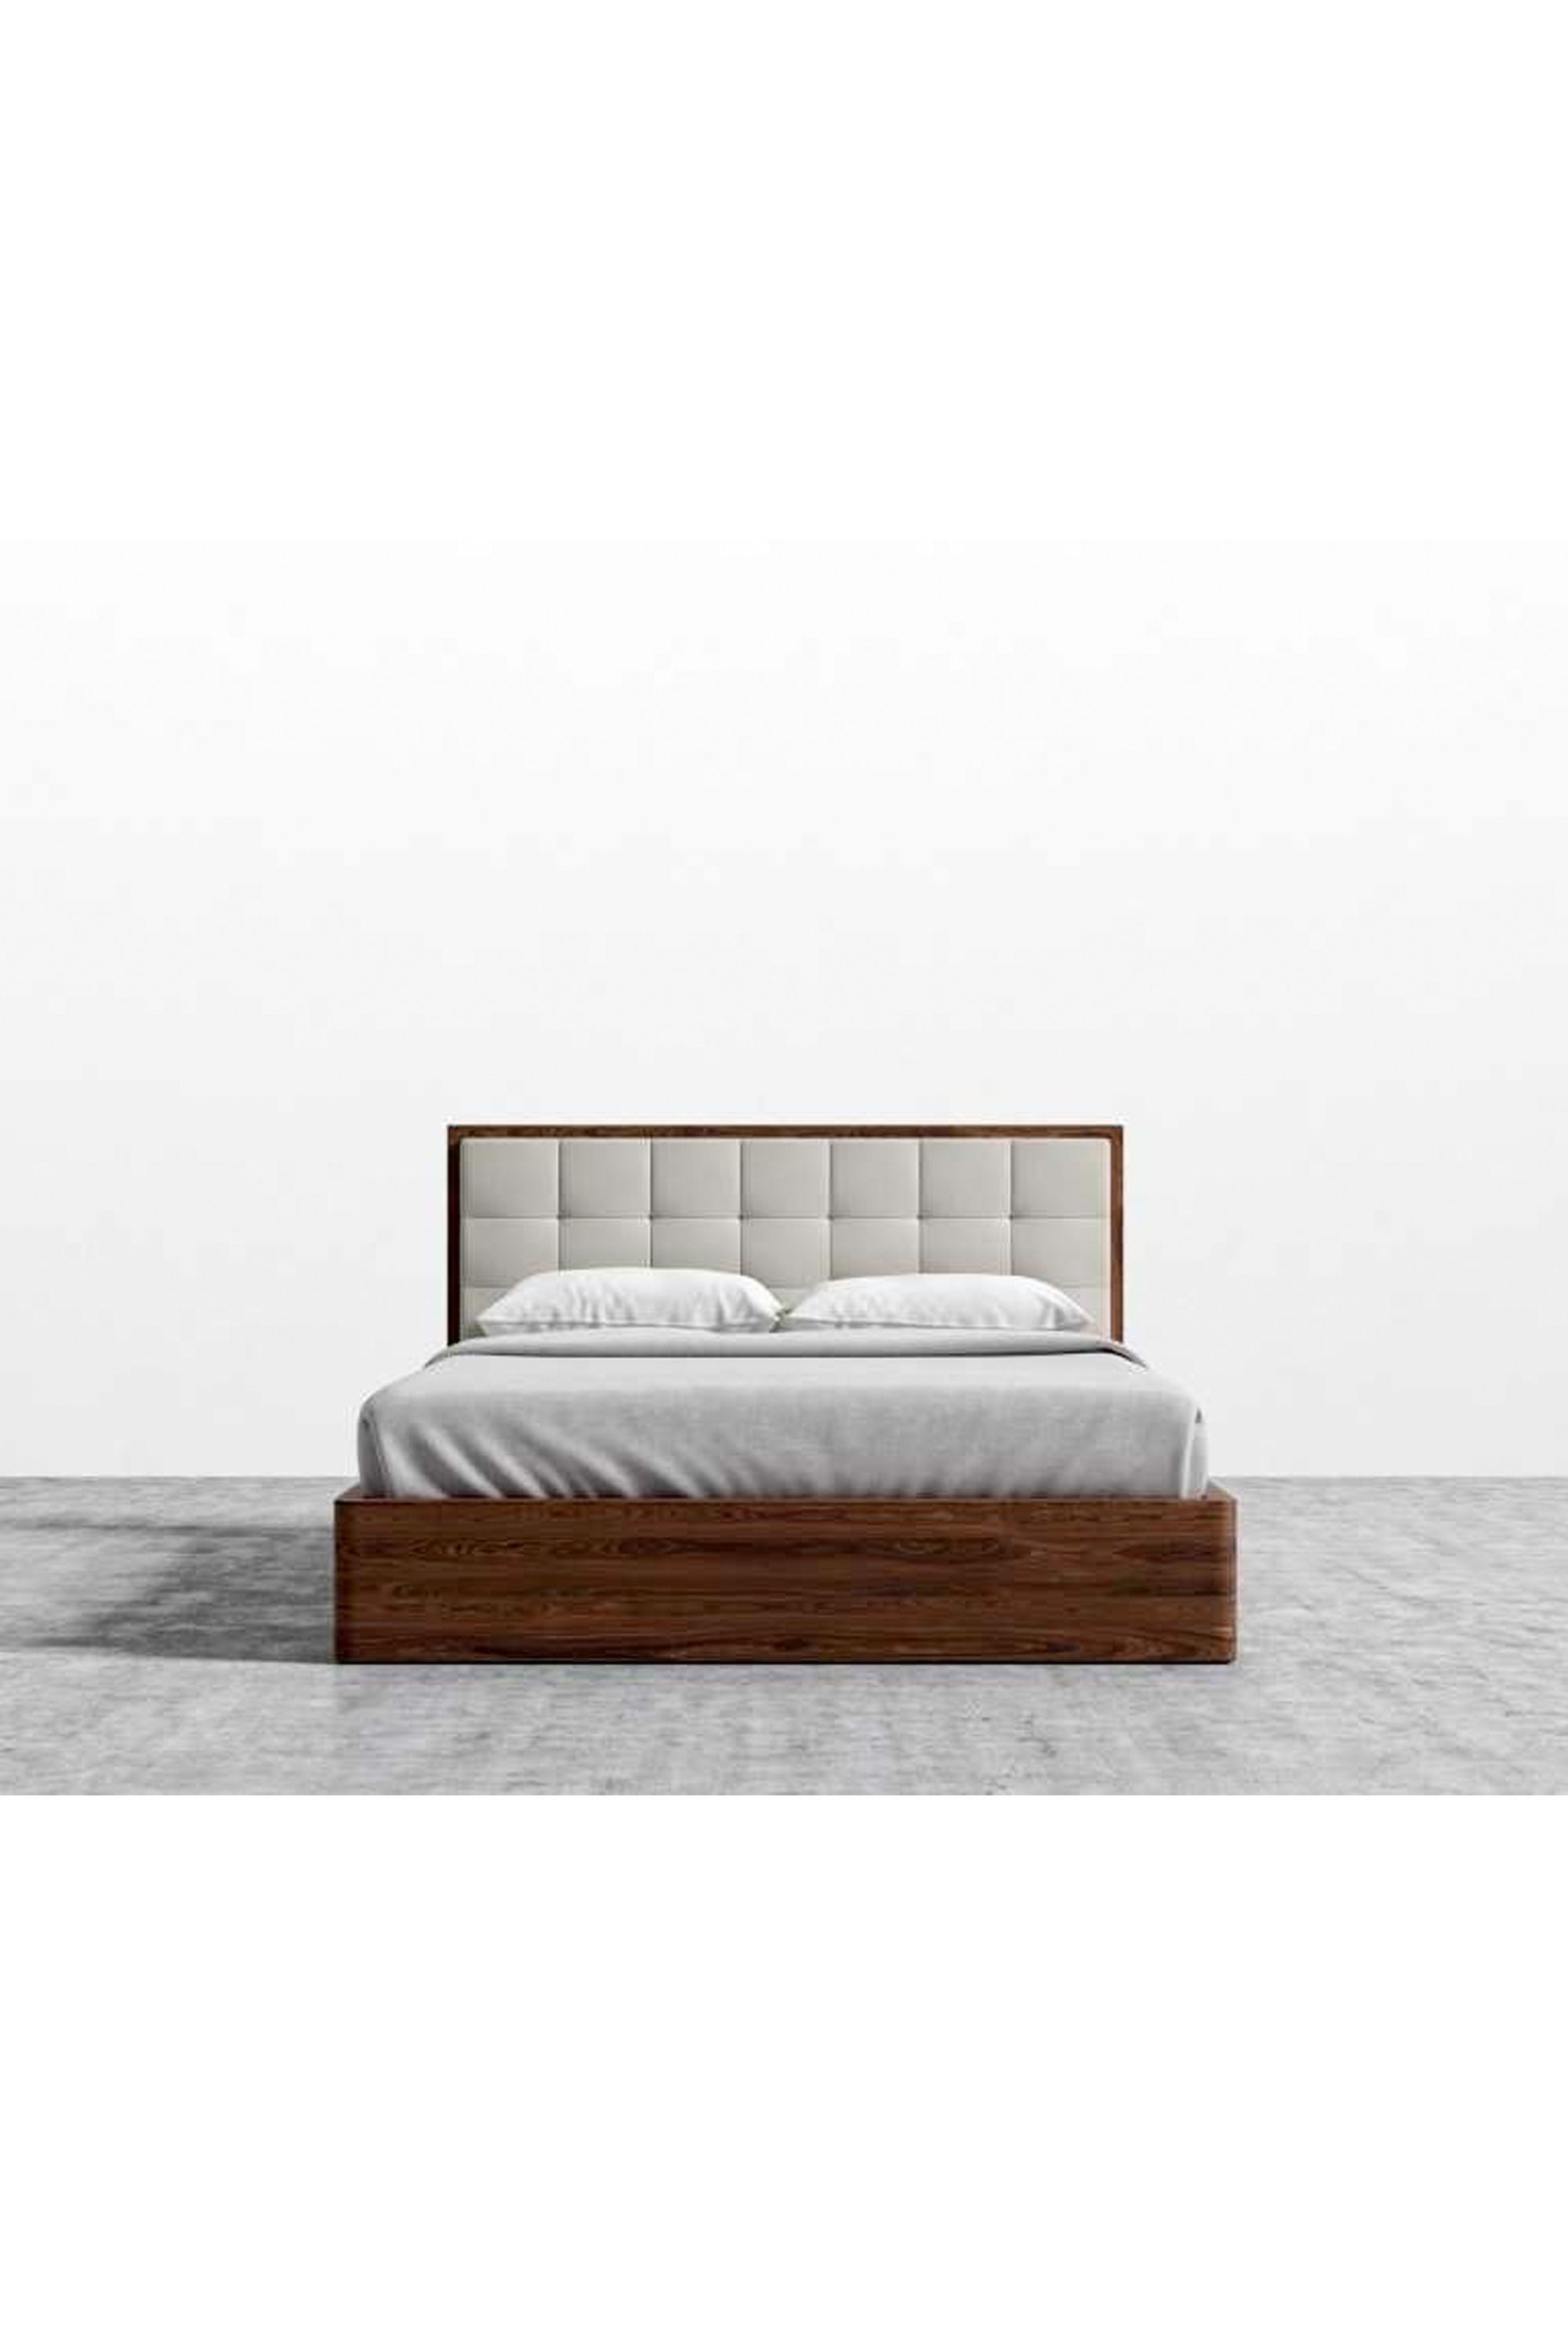 24 Best Space Saving Beds 2021, Compact Bed Frame